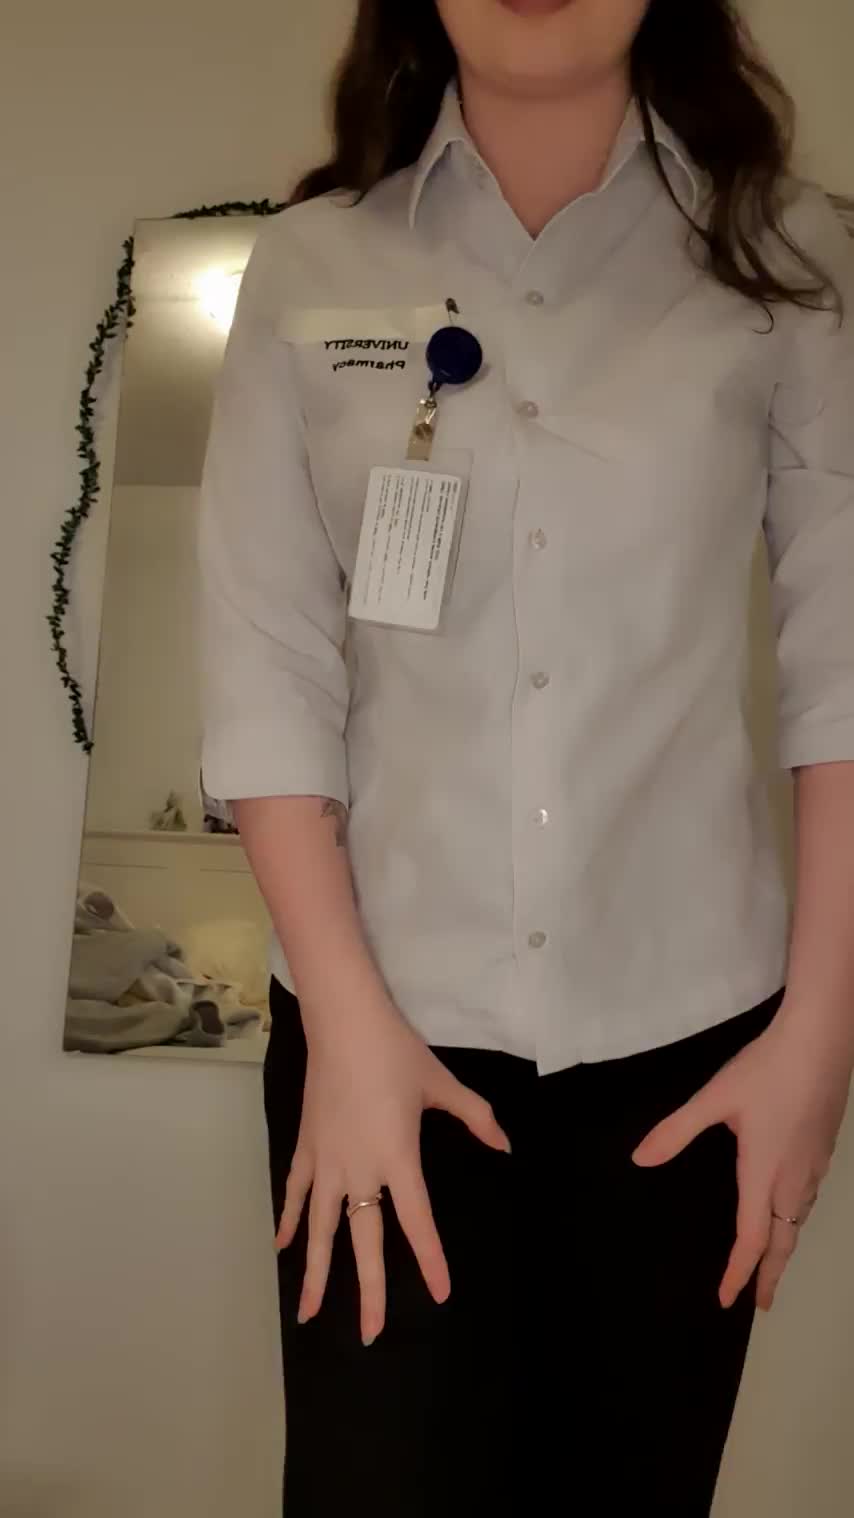 This is my university placement uniform... Do you want to be my mentor? : video clip